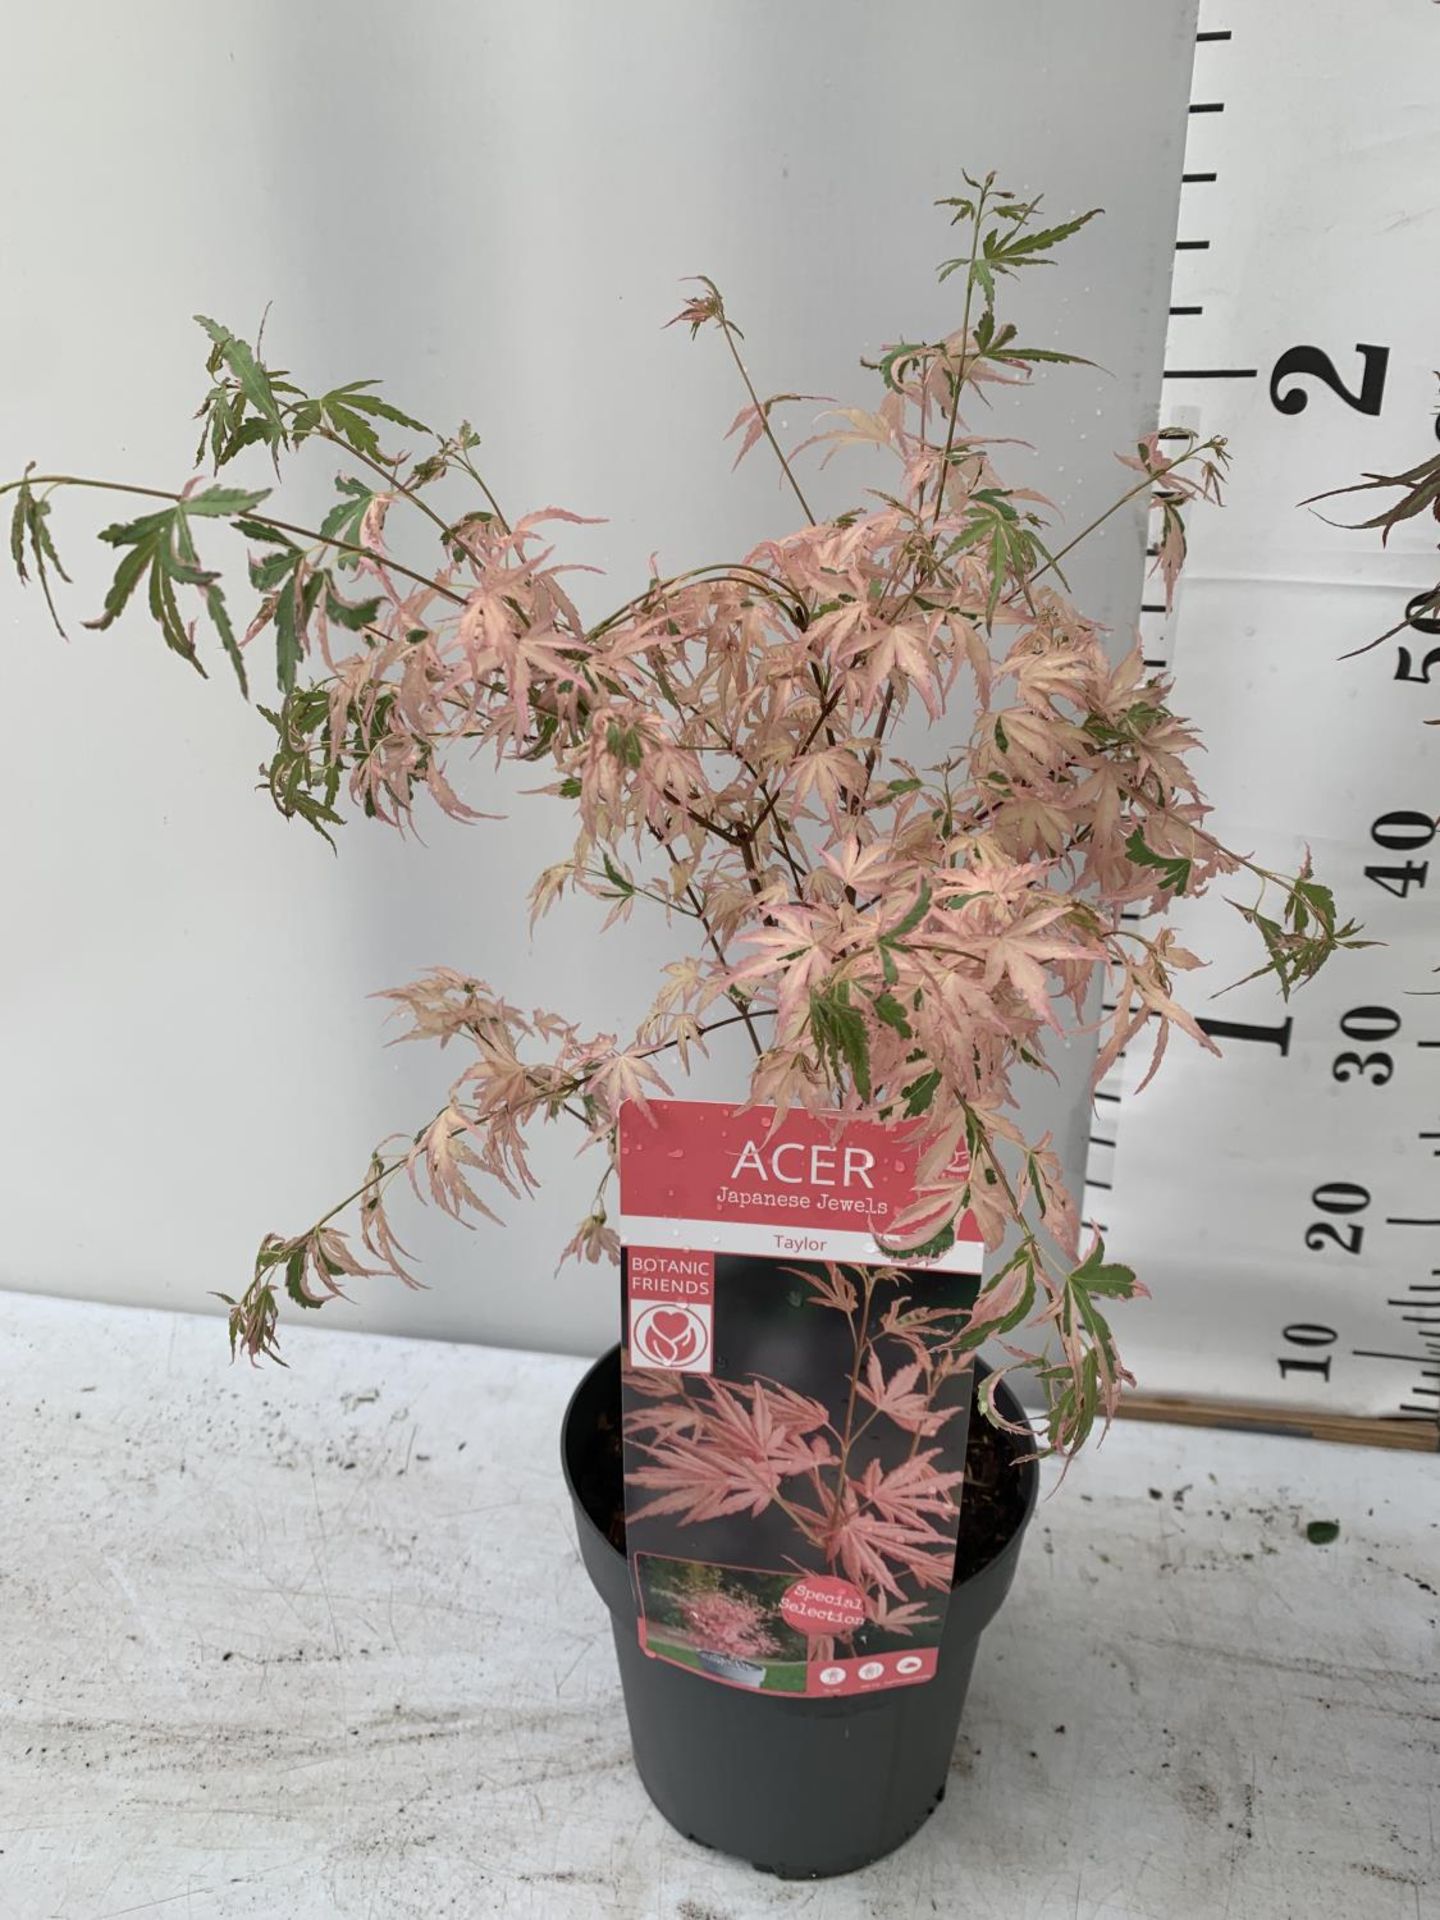 TWO ACER PALMATUM JAPANESE JEWELS TO INCLUDE TAYLOR AND SHAINIA IN 3 LTR POTS 60-70CM TALL TO BE - Image 2 of 9